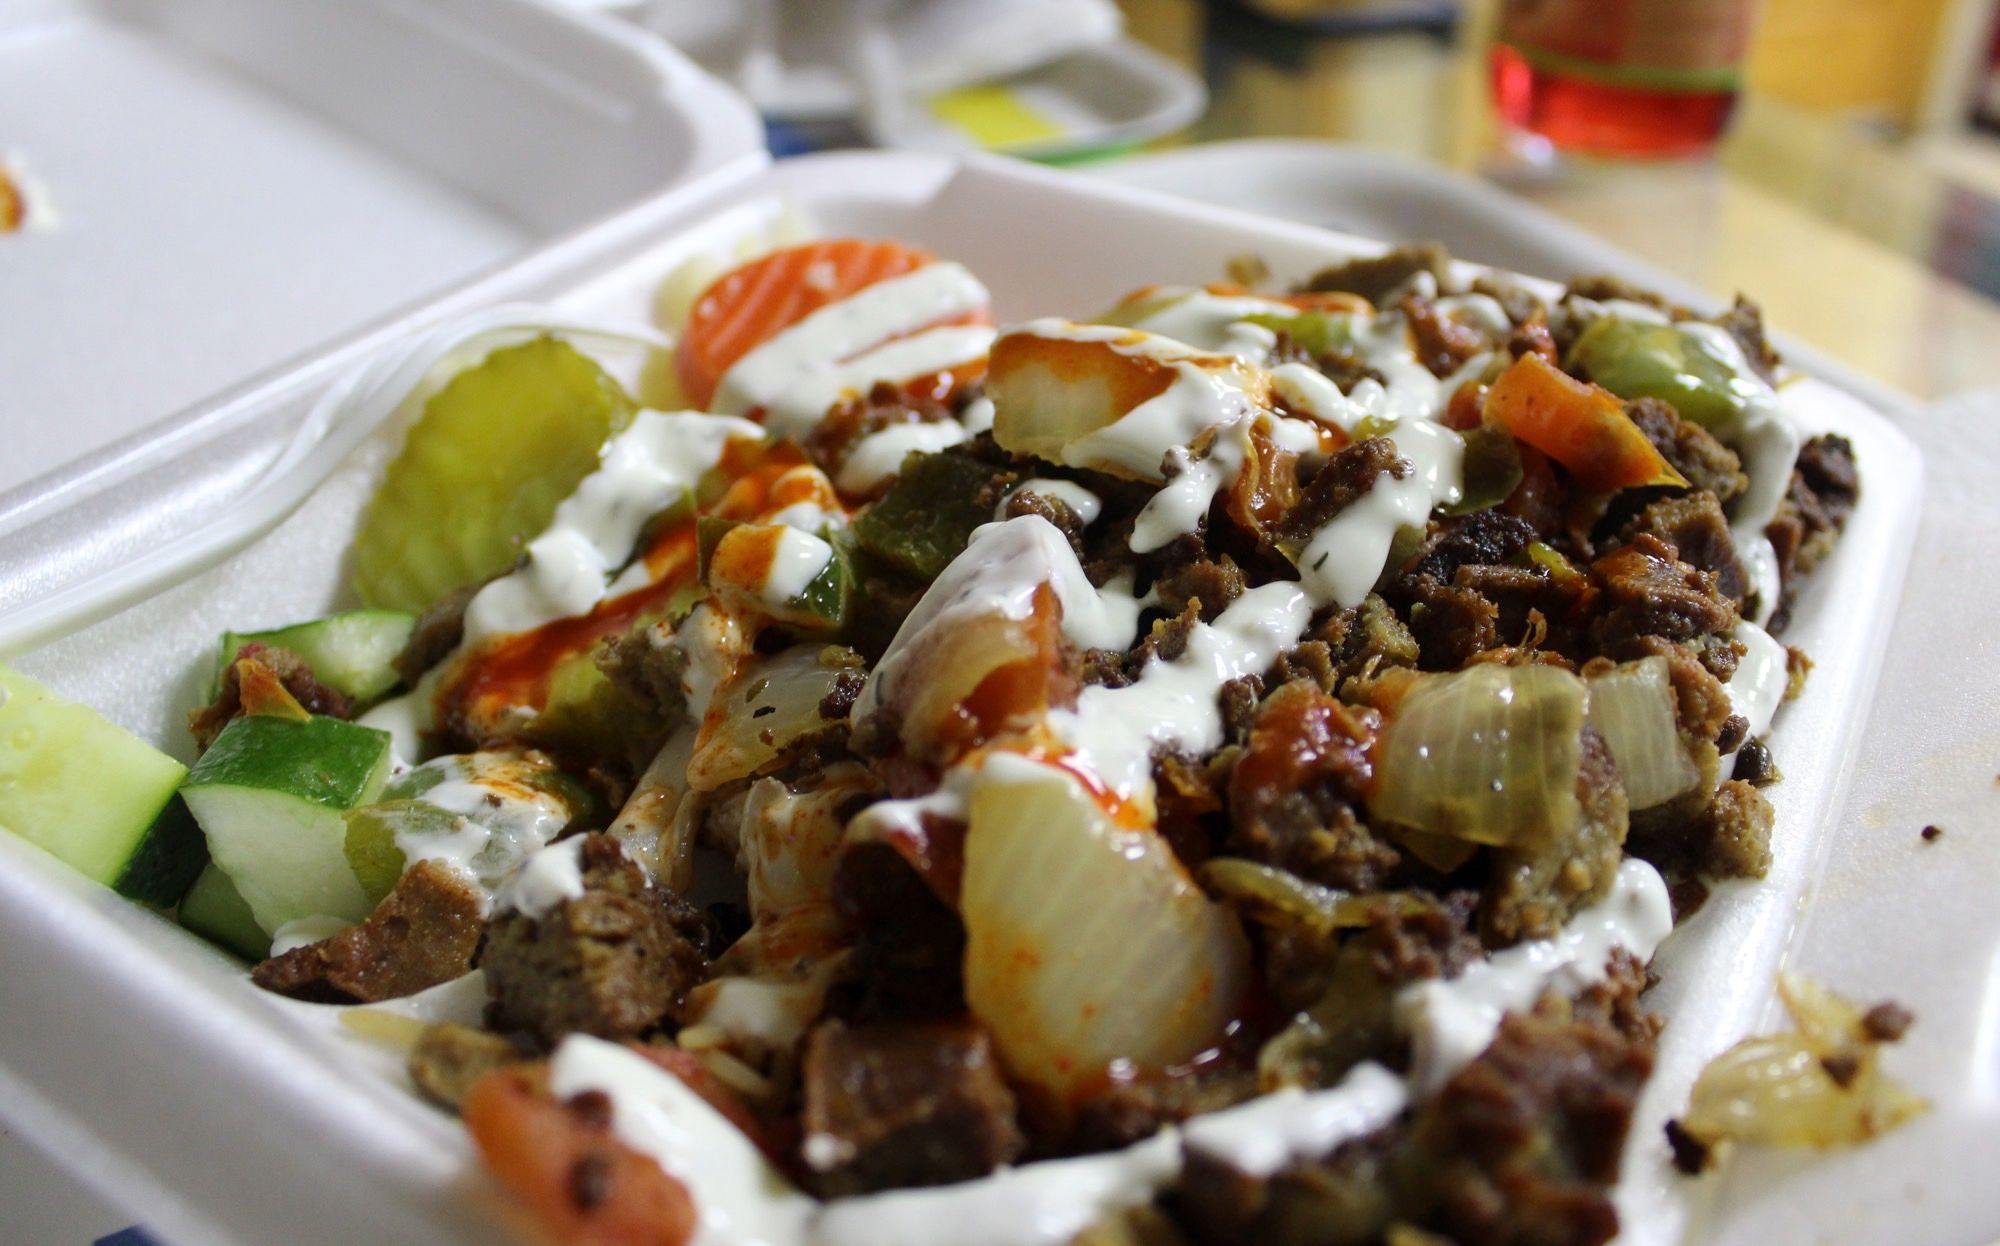 Grab A Cheap But Filling Lunch At Gyro King